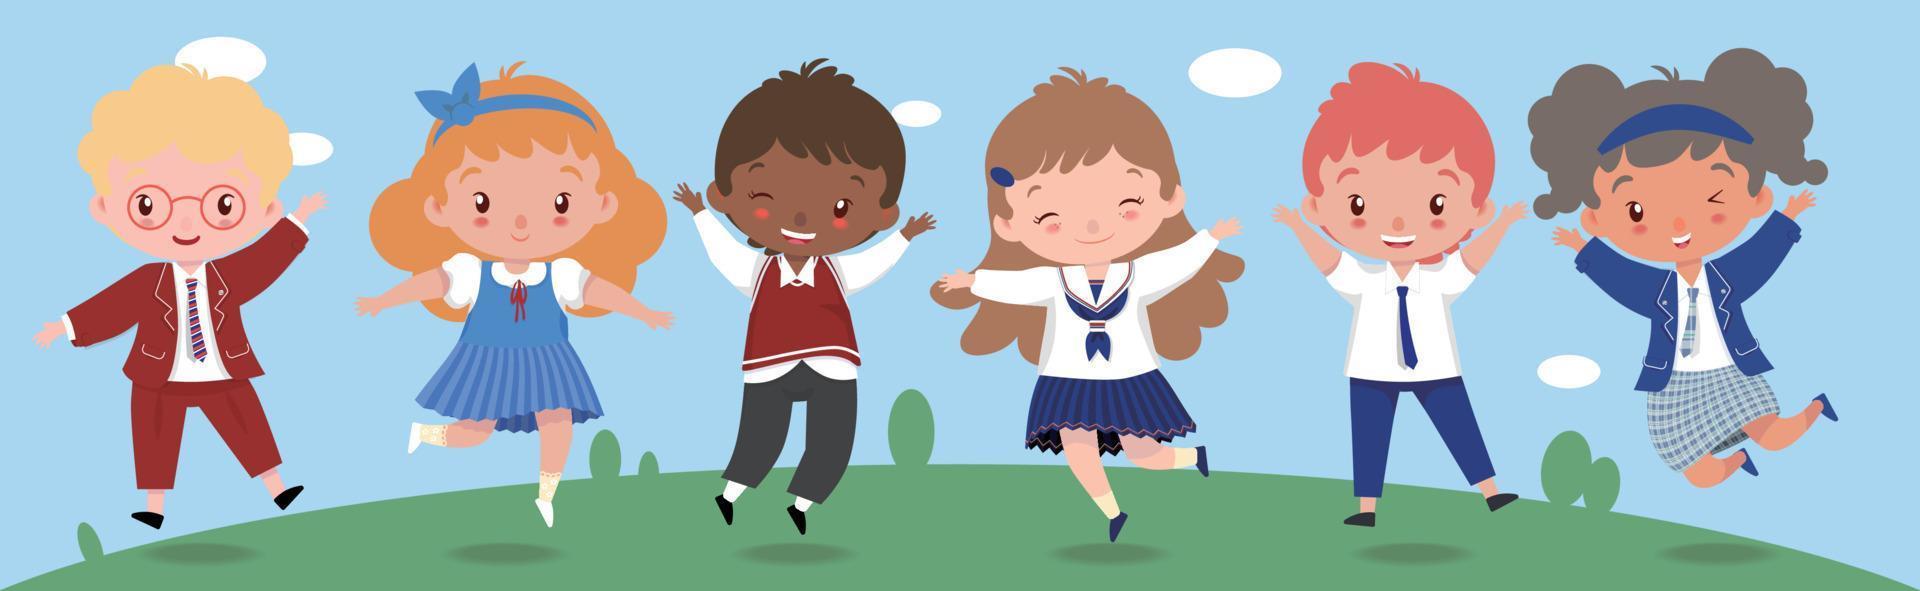 01Children in different styles of student uniforms jumping happily vector